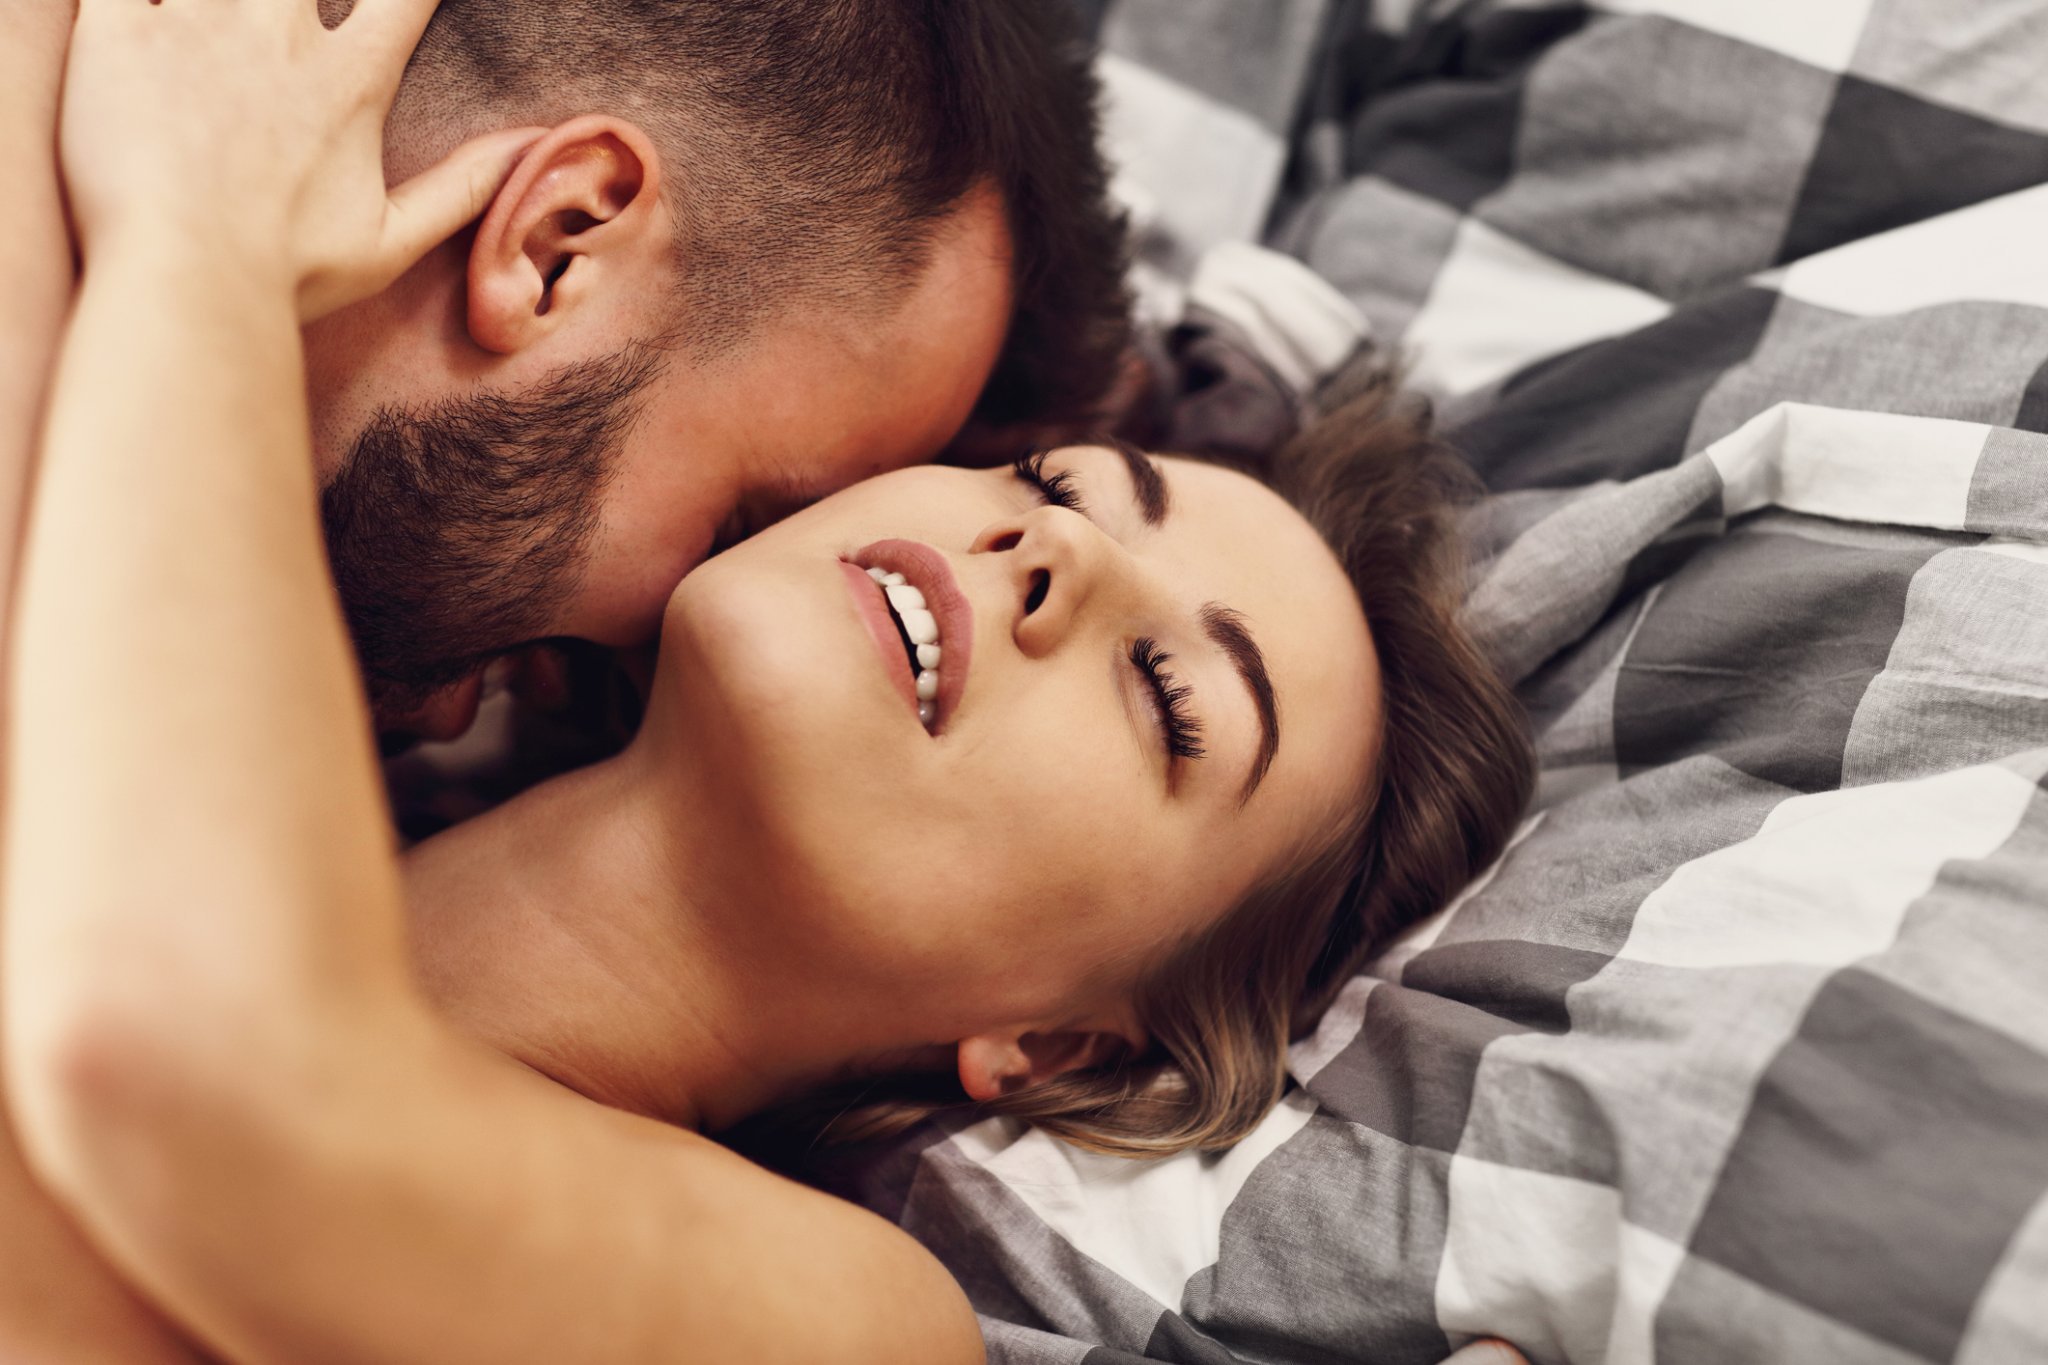 Is it wrong to think about someone else during sex with your partner?